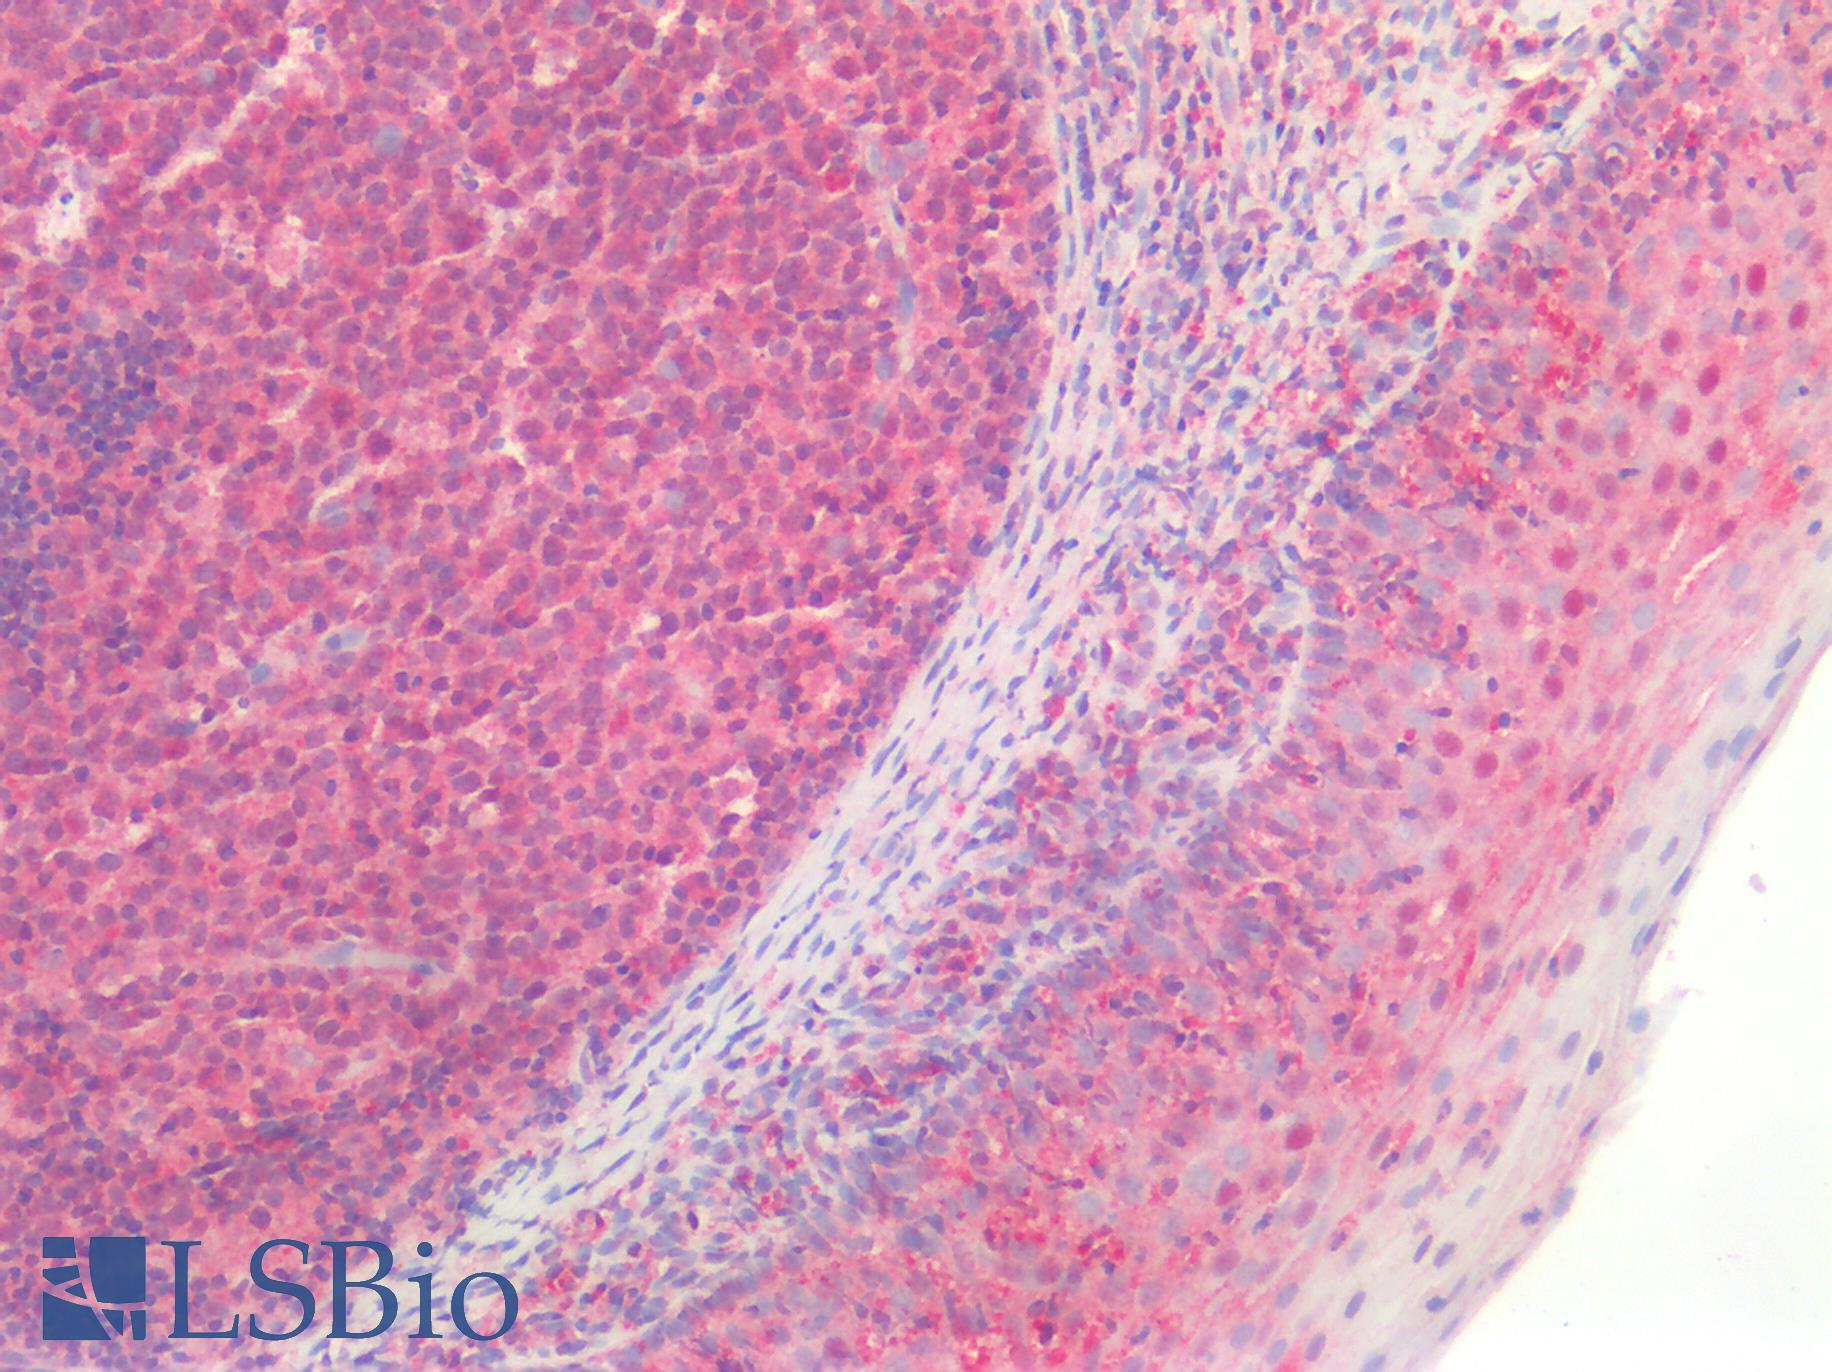 MLPH / Melanophilin Antibody - Human Tonsil: Formalin-Fixed, Paraffin-Embedded (FFPE)